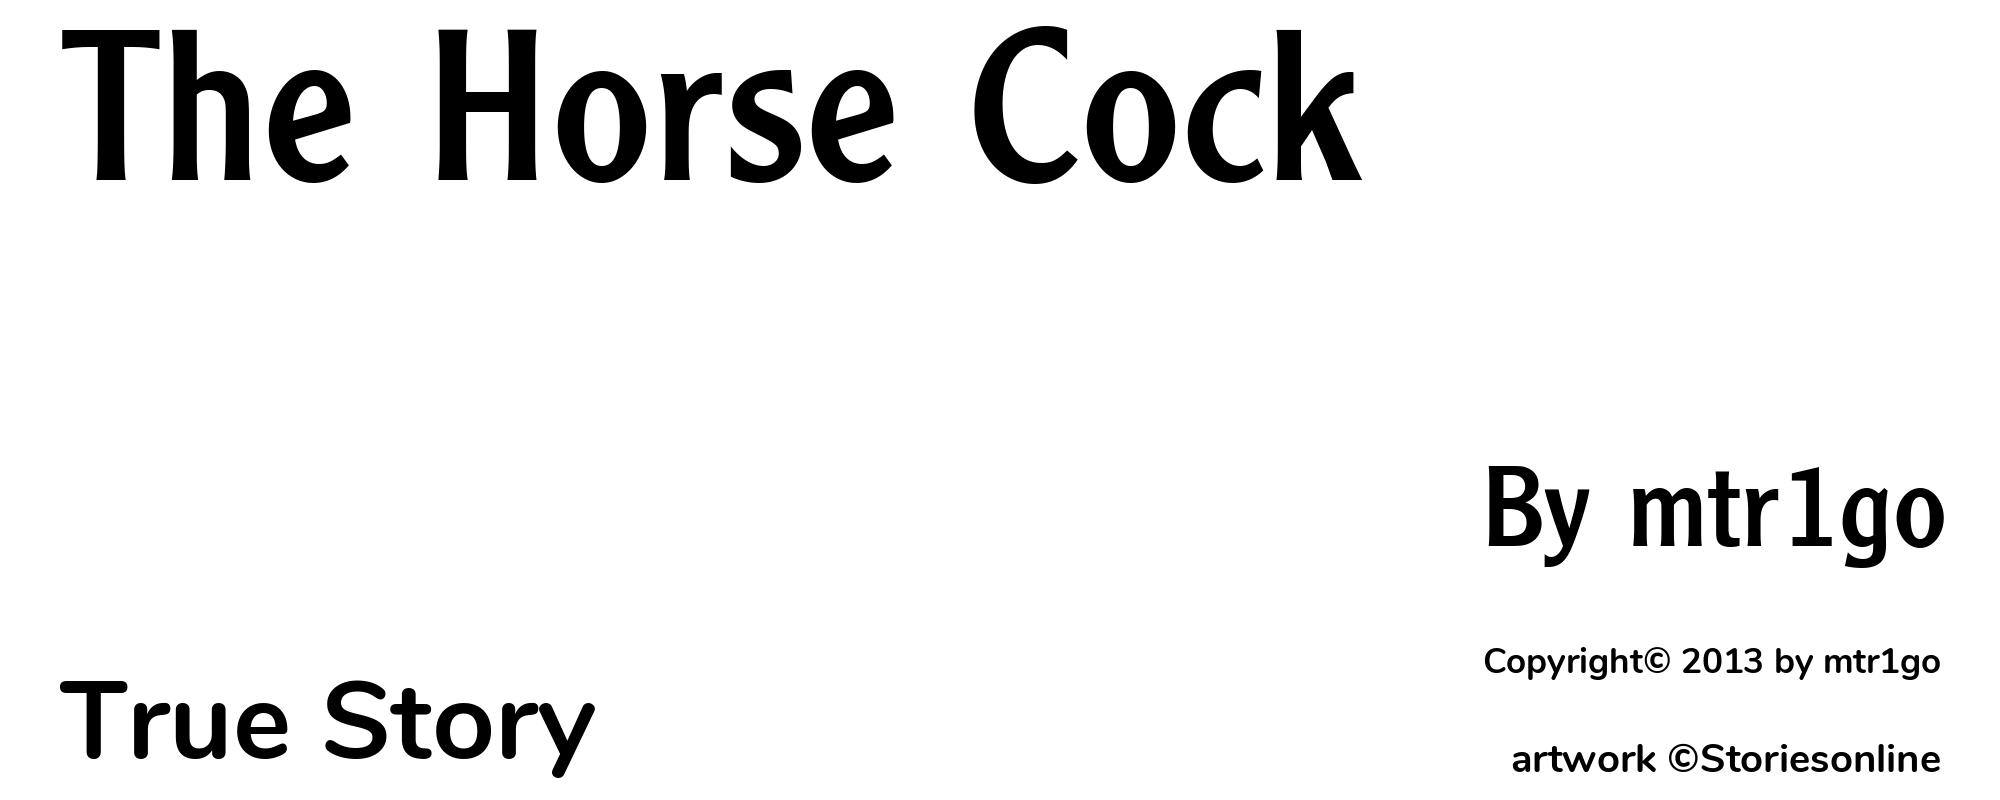 The Horse Cock - Cover